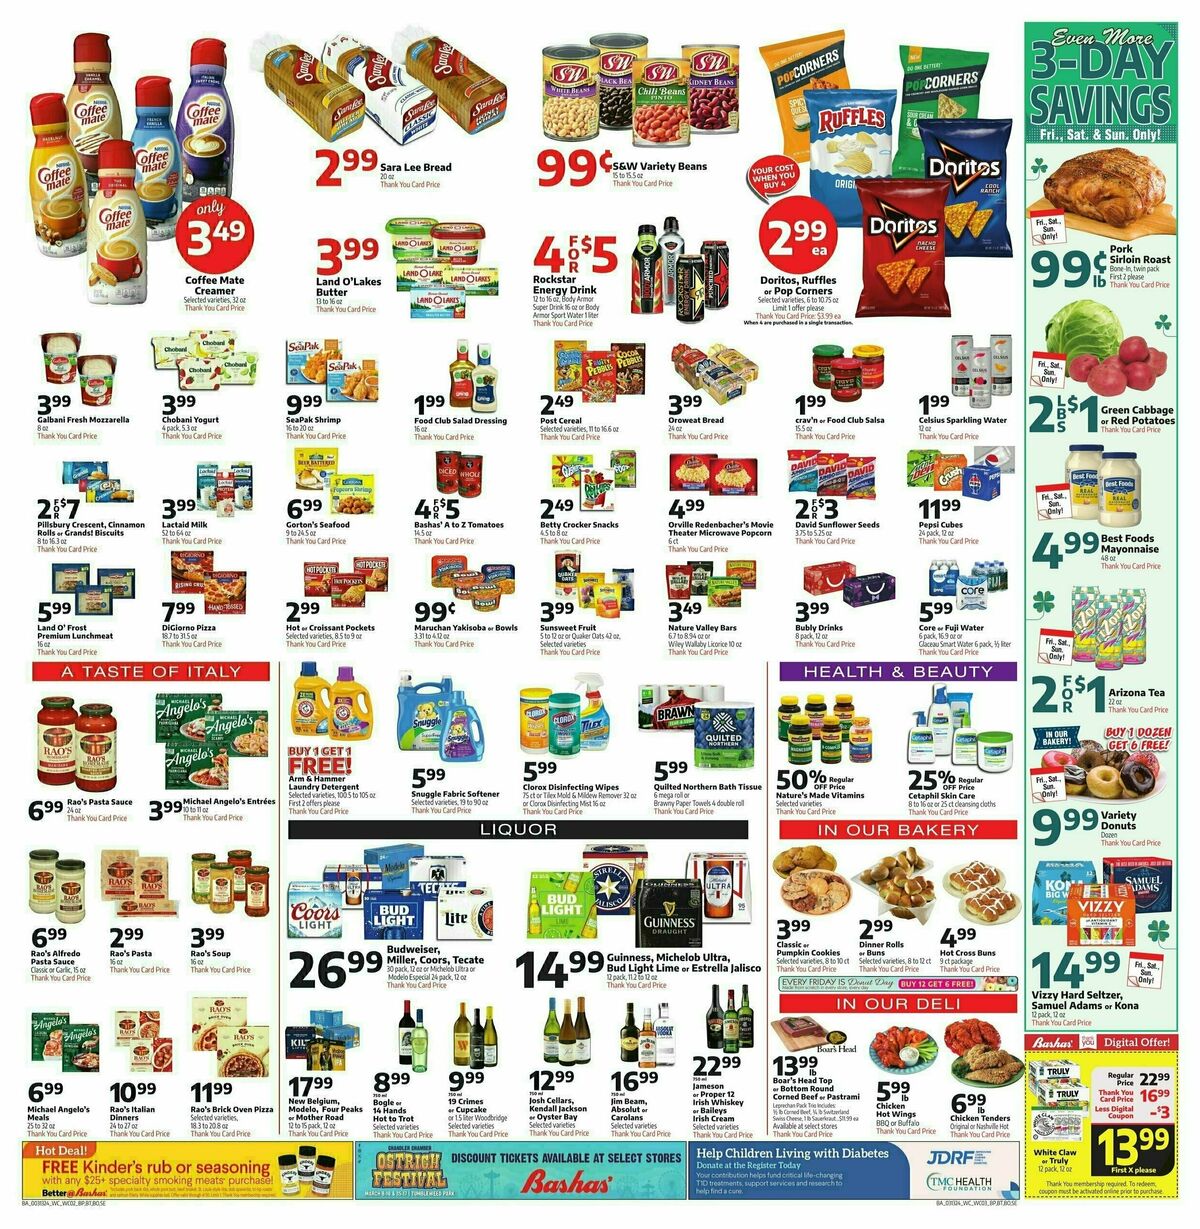 Bashas Weekly Ad from March 13